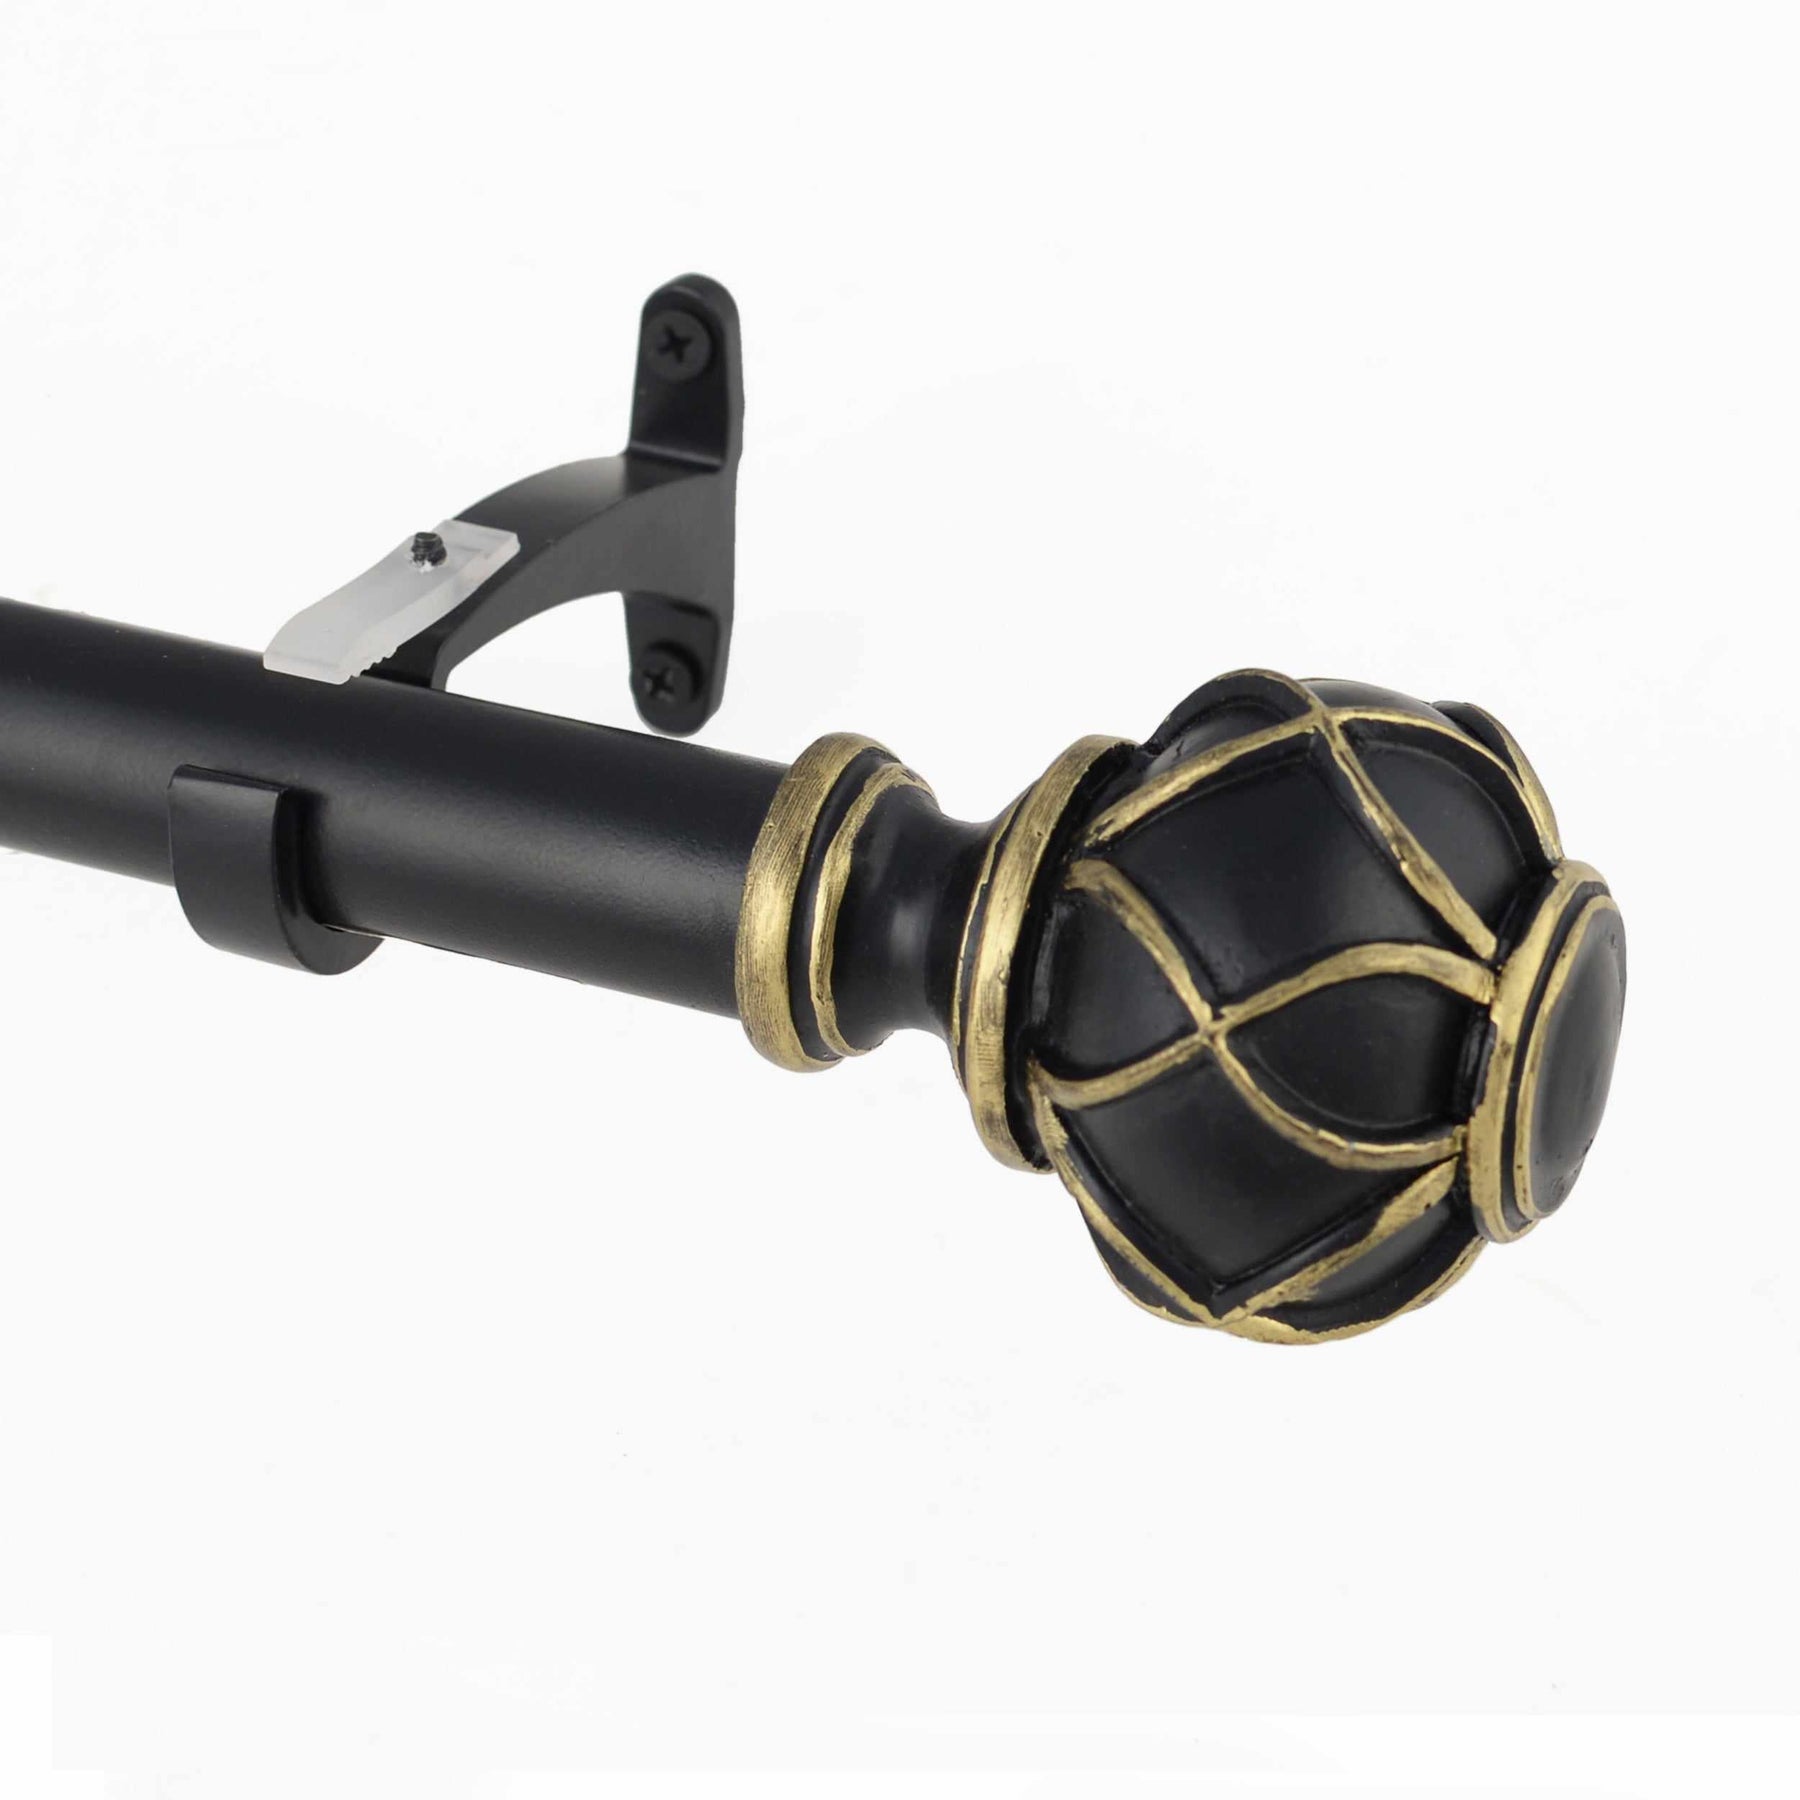  Friedrich Black and Gold Expandable Curtain Rod - Black-Gold